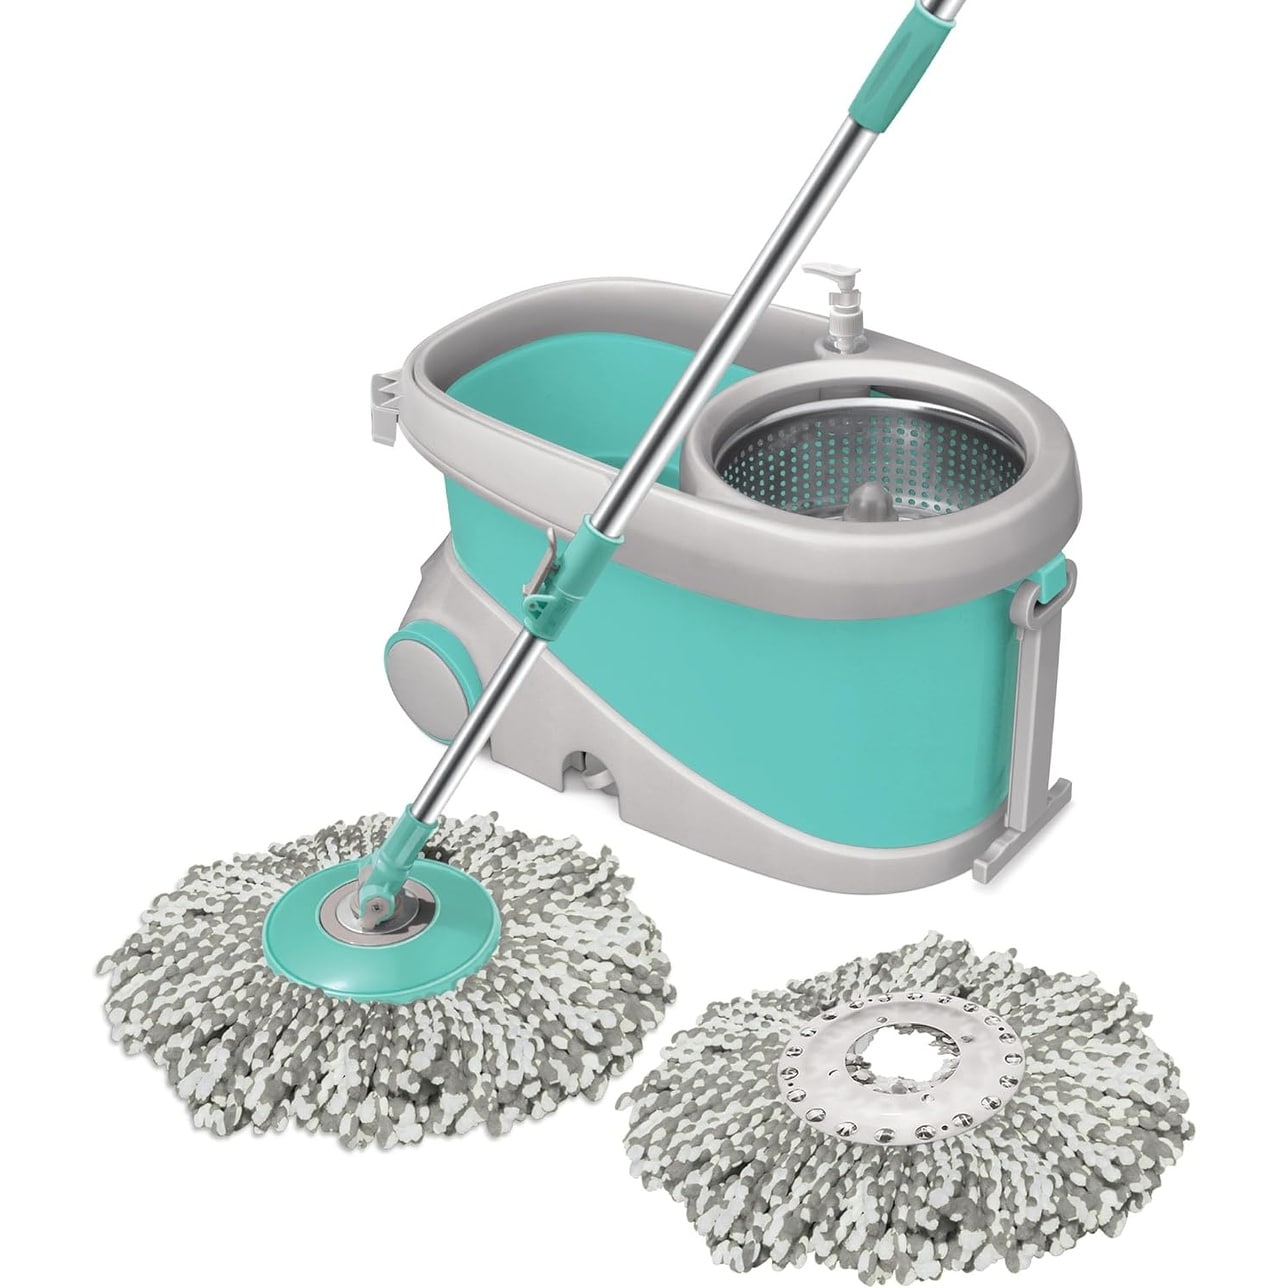 https://ak1.ostkcdn.com/images/products/is/images/direct/f7ec828616837991a7a377ae1fbb0ec4af4ba44c/360%C2%BA-Spin-Mop-and-Bucket-System-with-Micro%EF%AC%81ber-Technology%2Cwith-Wheels.jpg